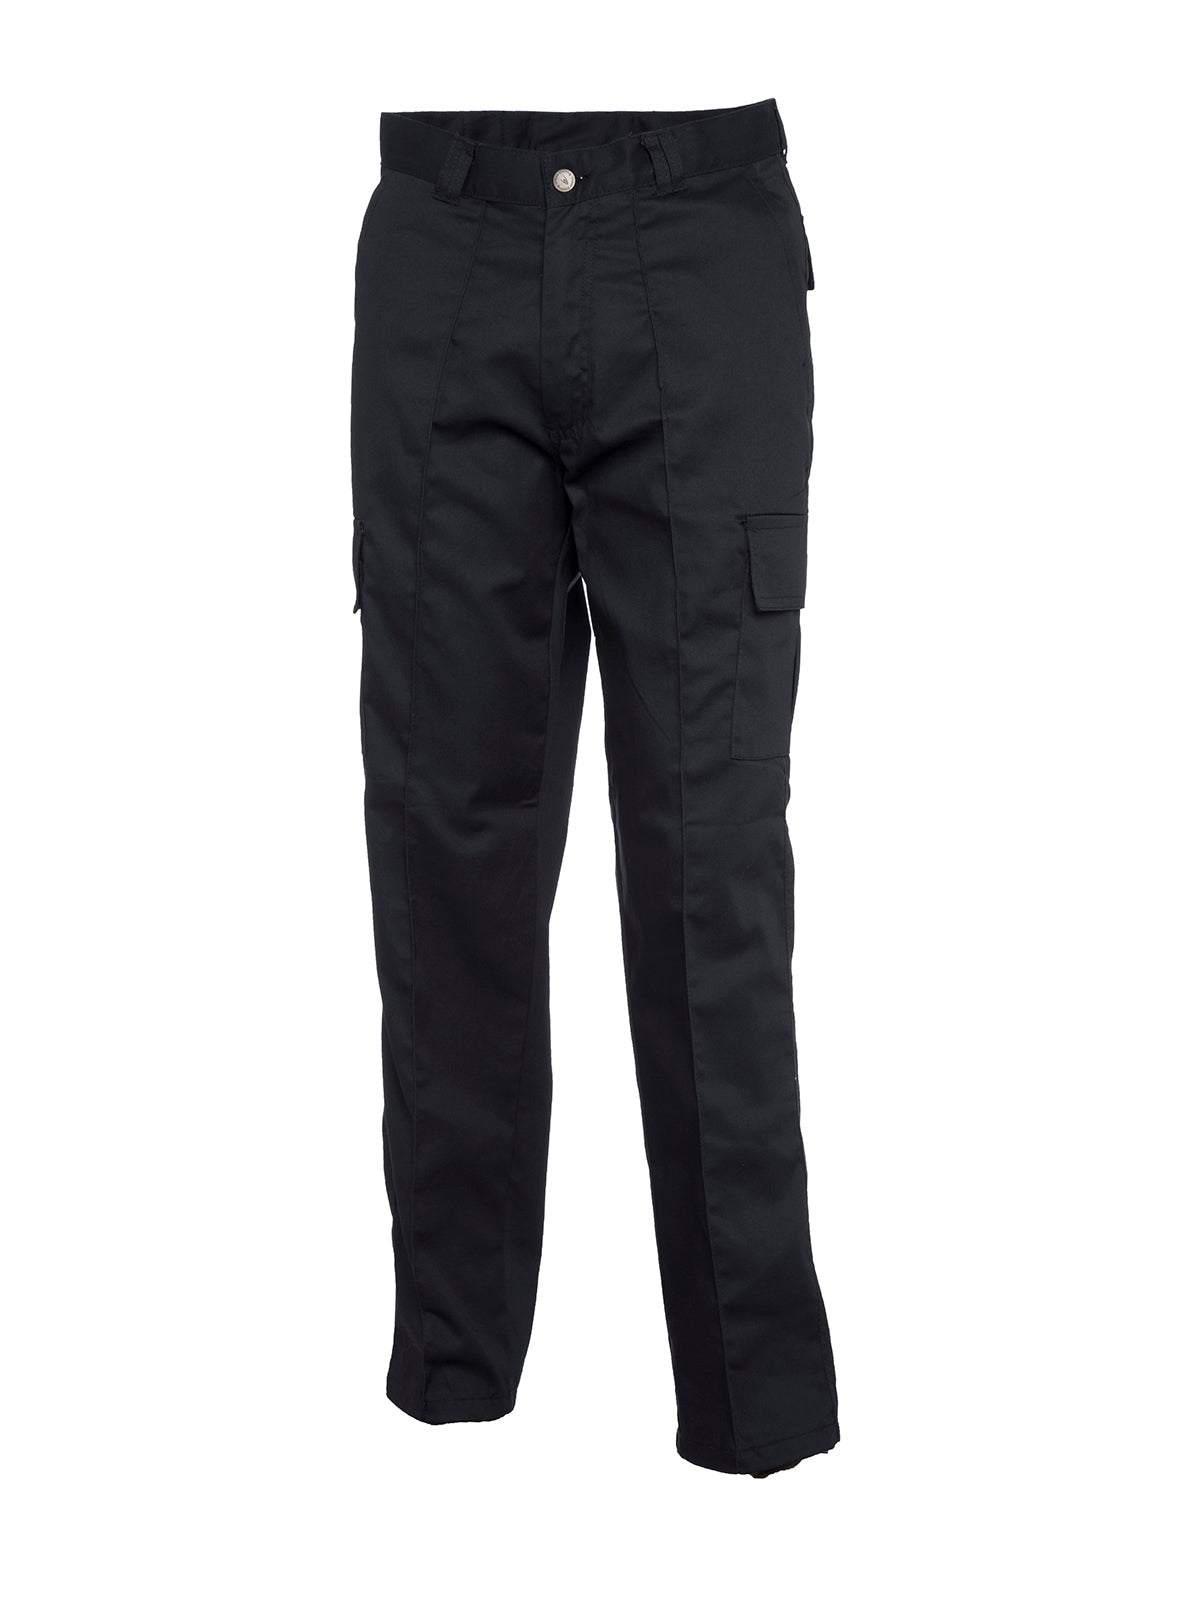 Standard Cargo Trousers (Supported Internship)